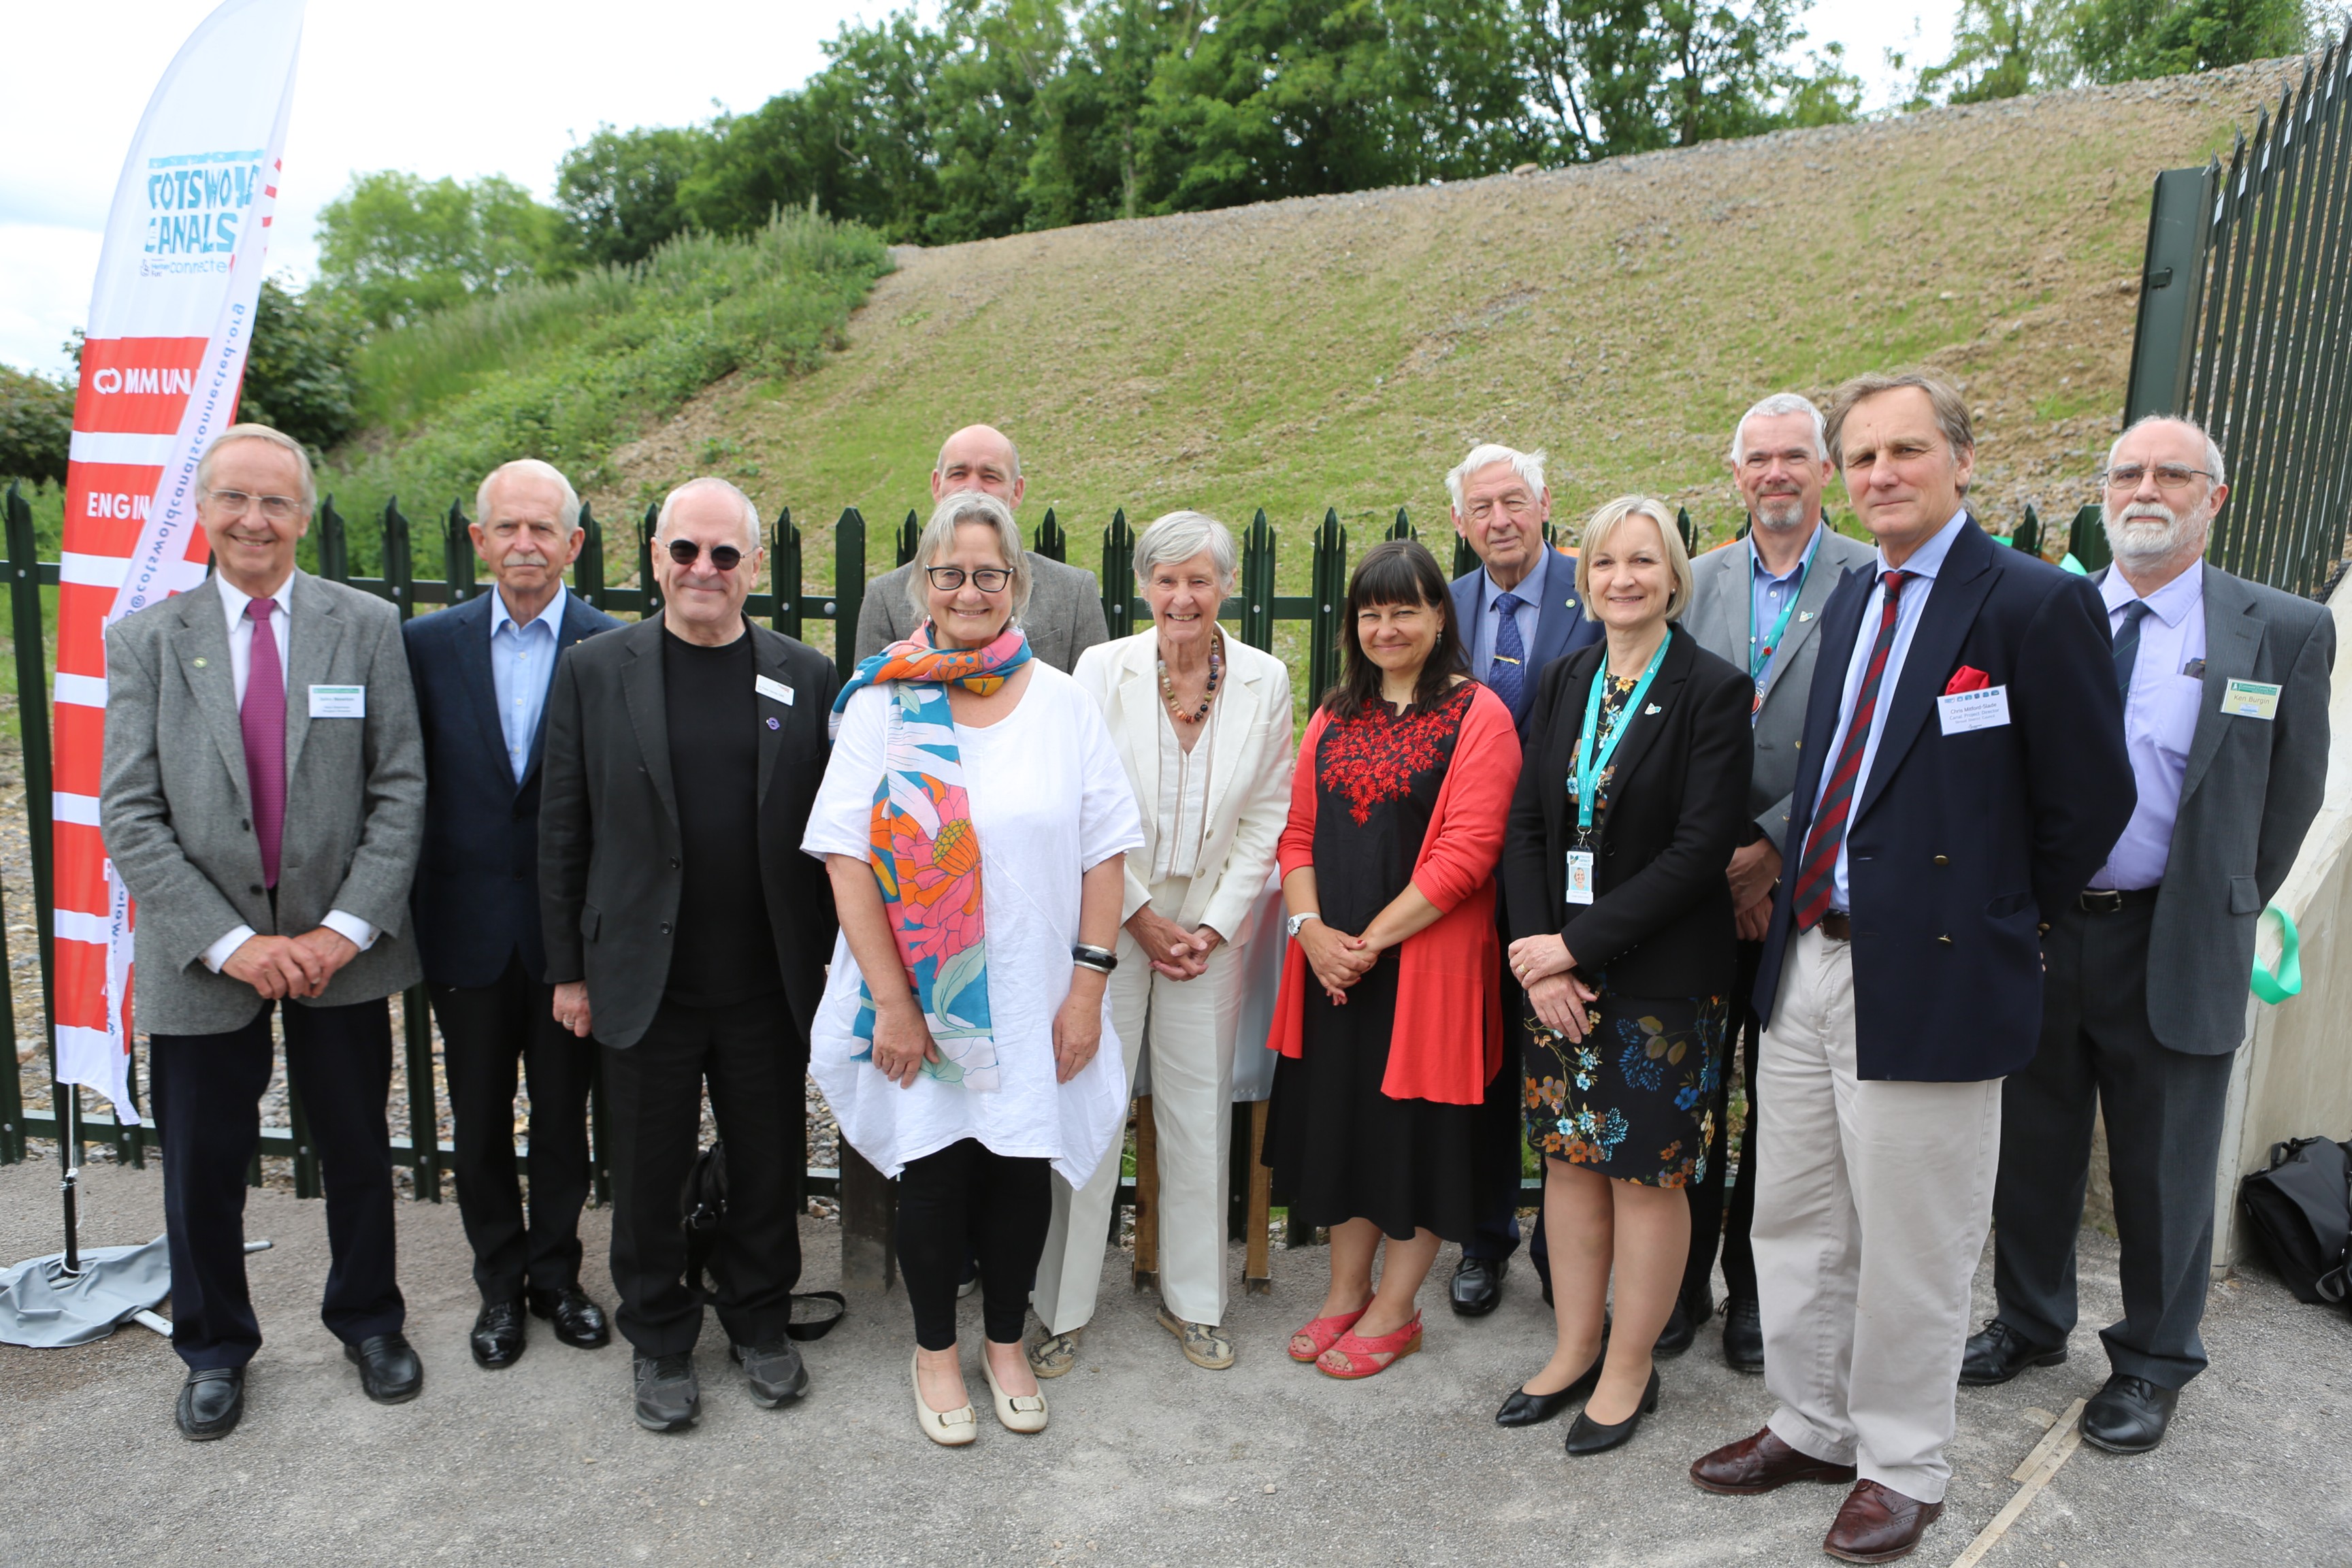 23 May 2022 – Attending the opening and naming of the new Ocean Jubilee Bridge at Stonehouse.